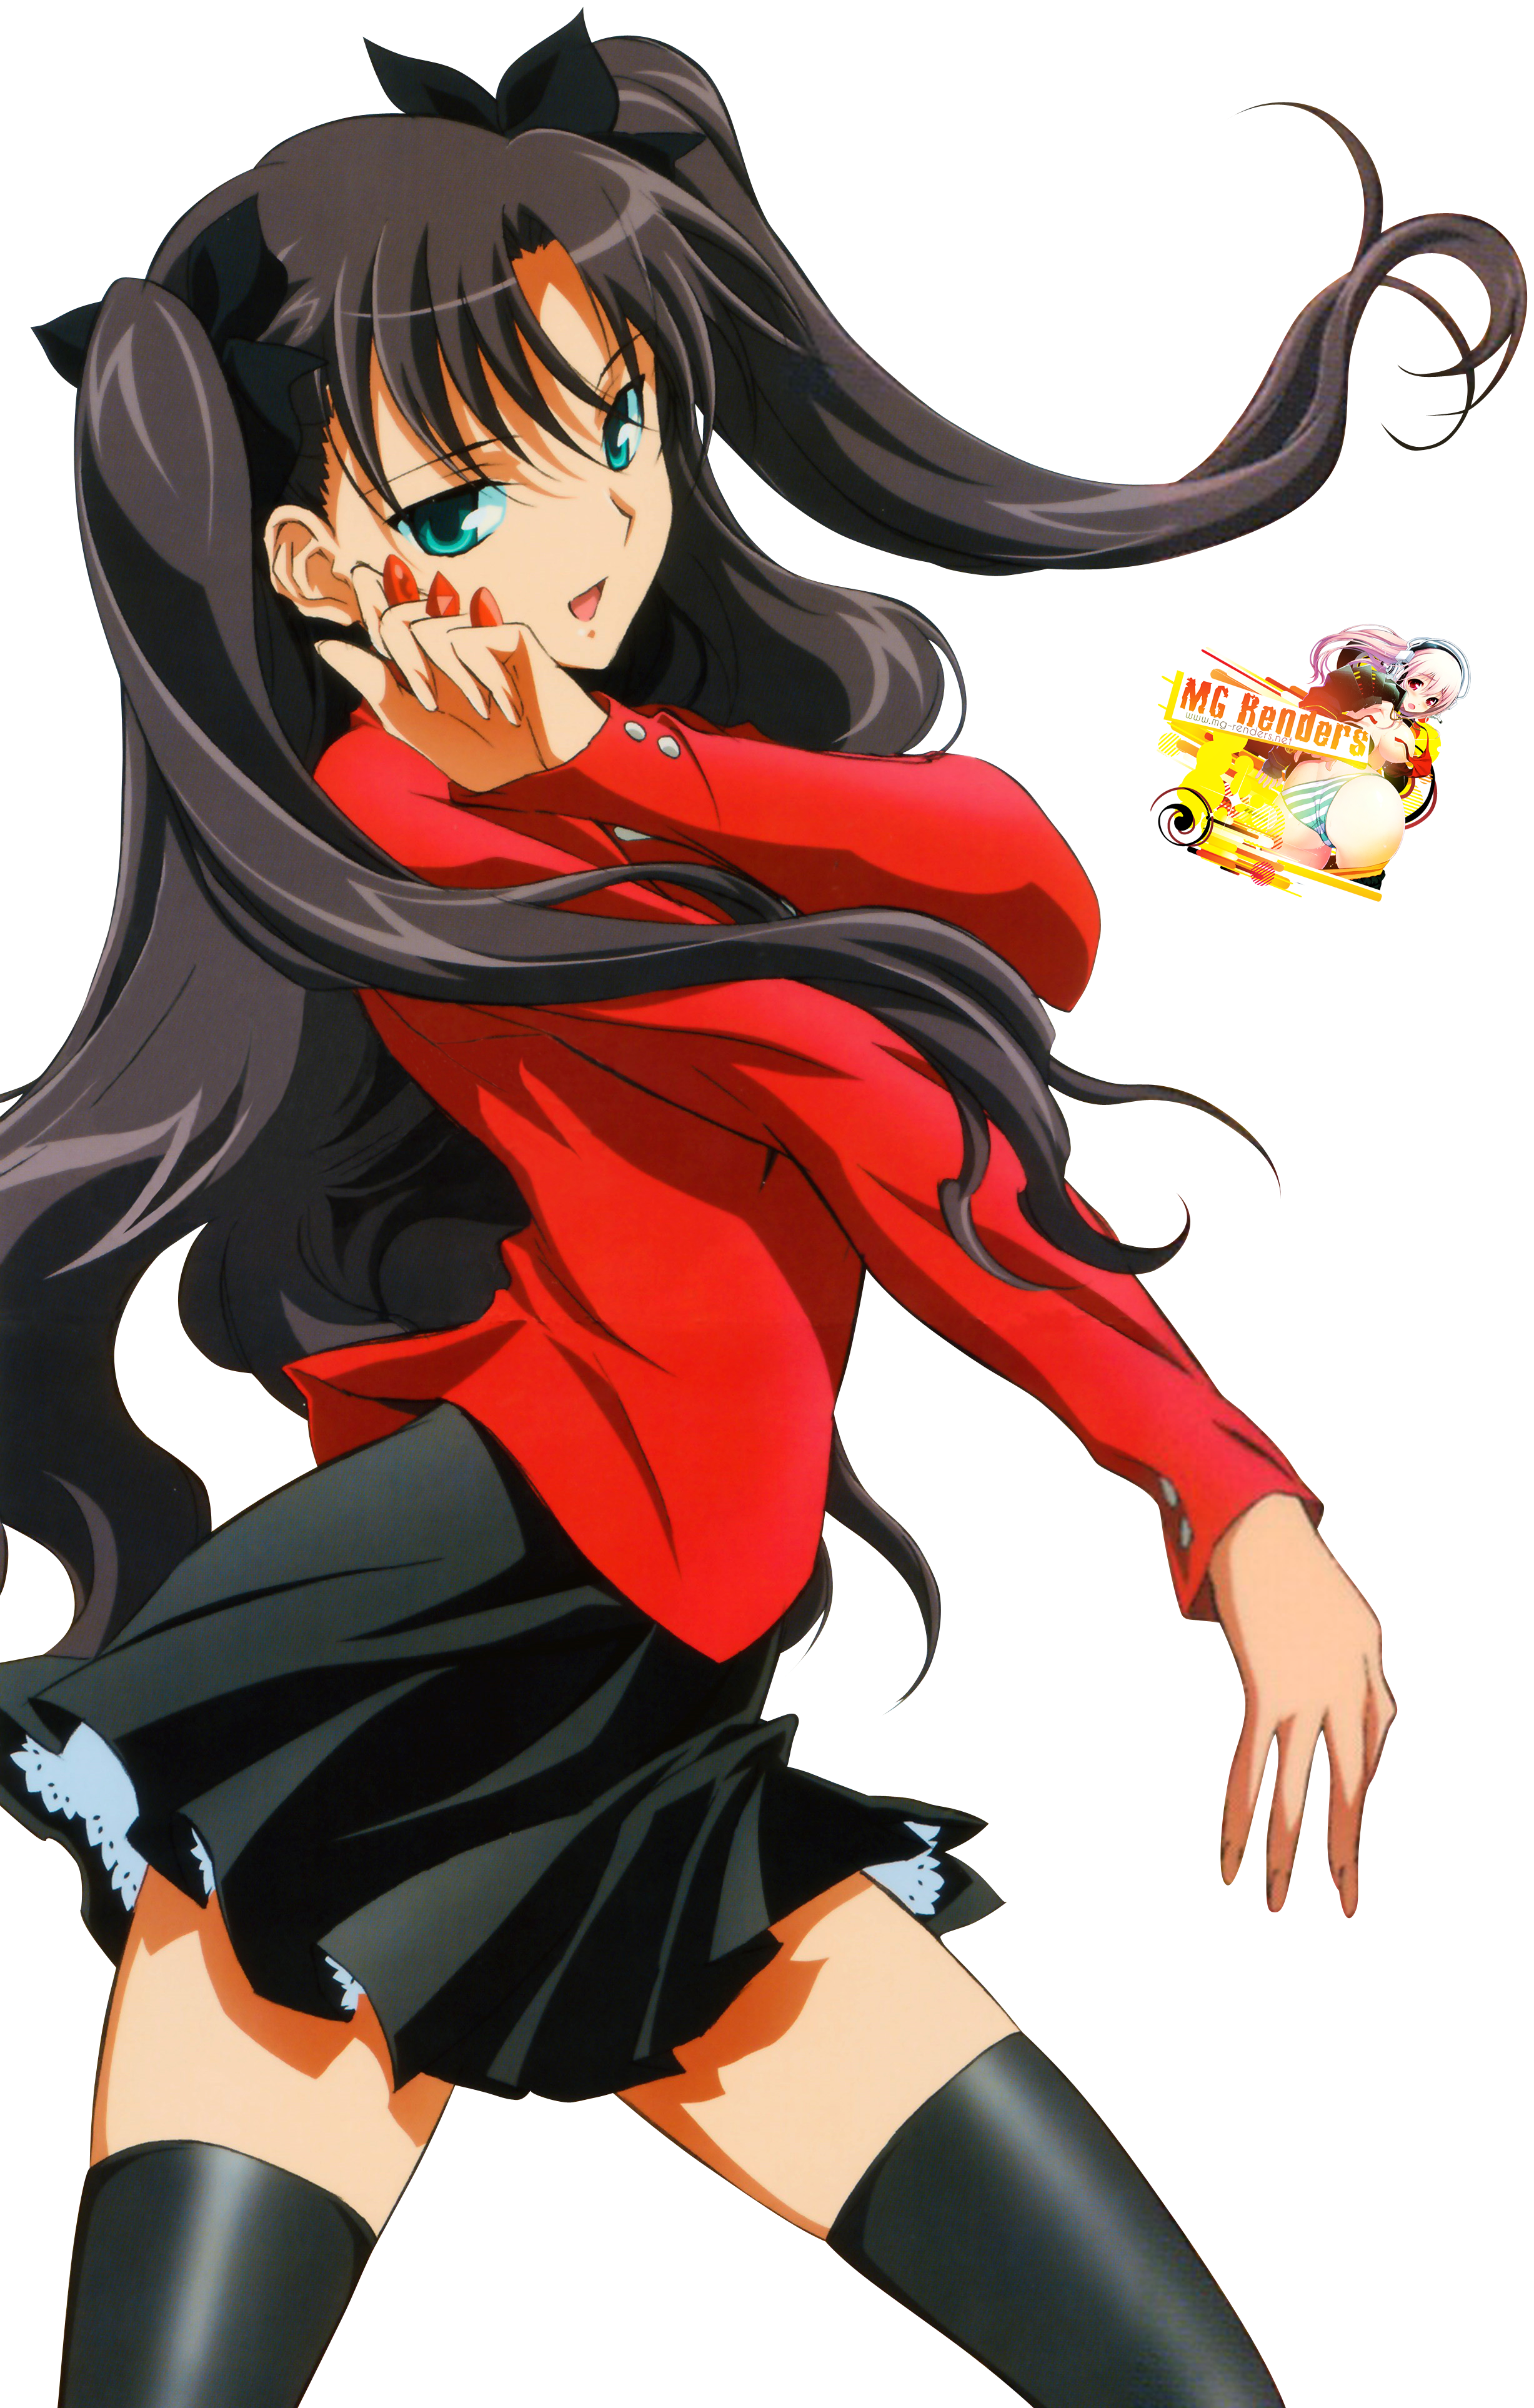 Fate stay night - Tohsaka Rin Render 5 - Anime - PNG Image (Without